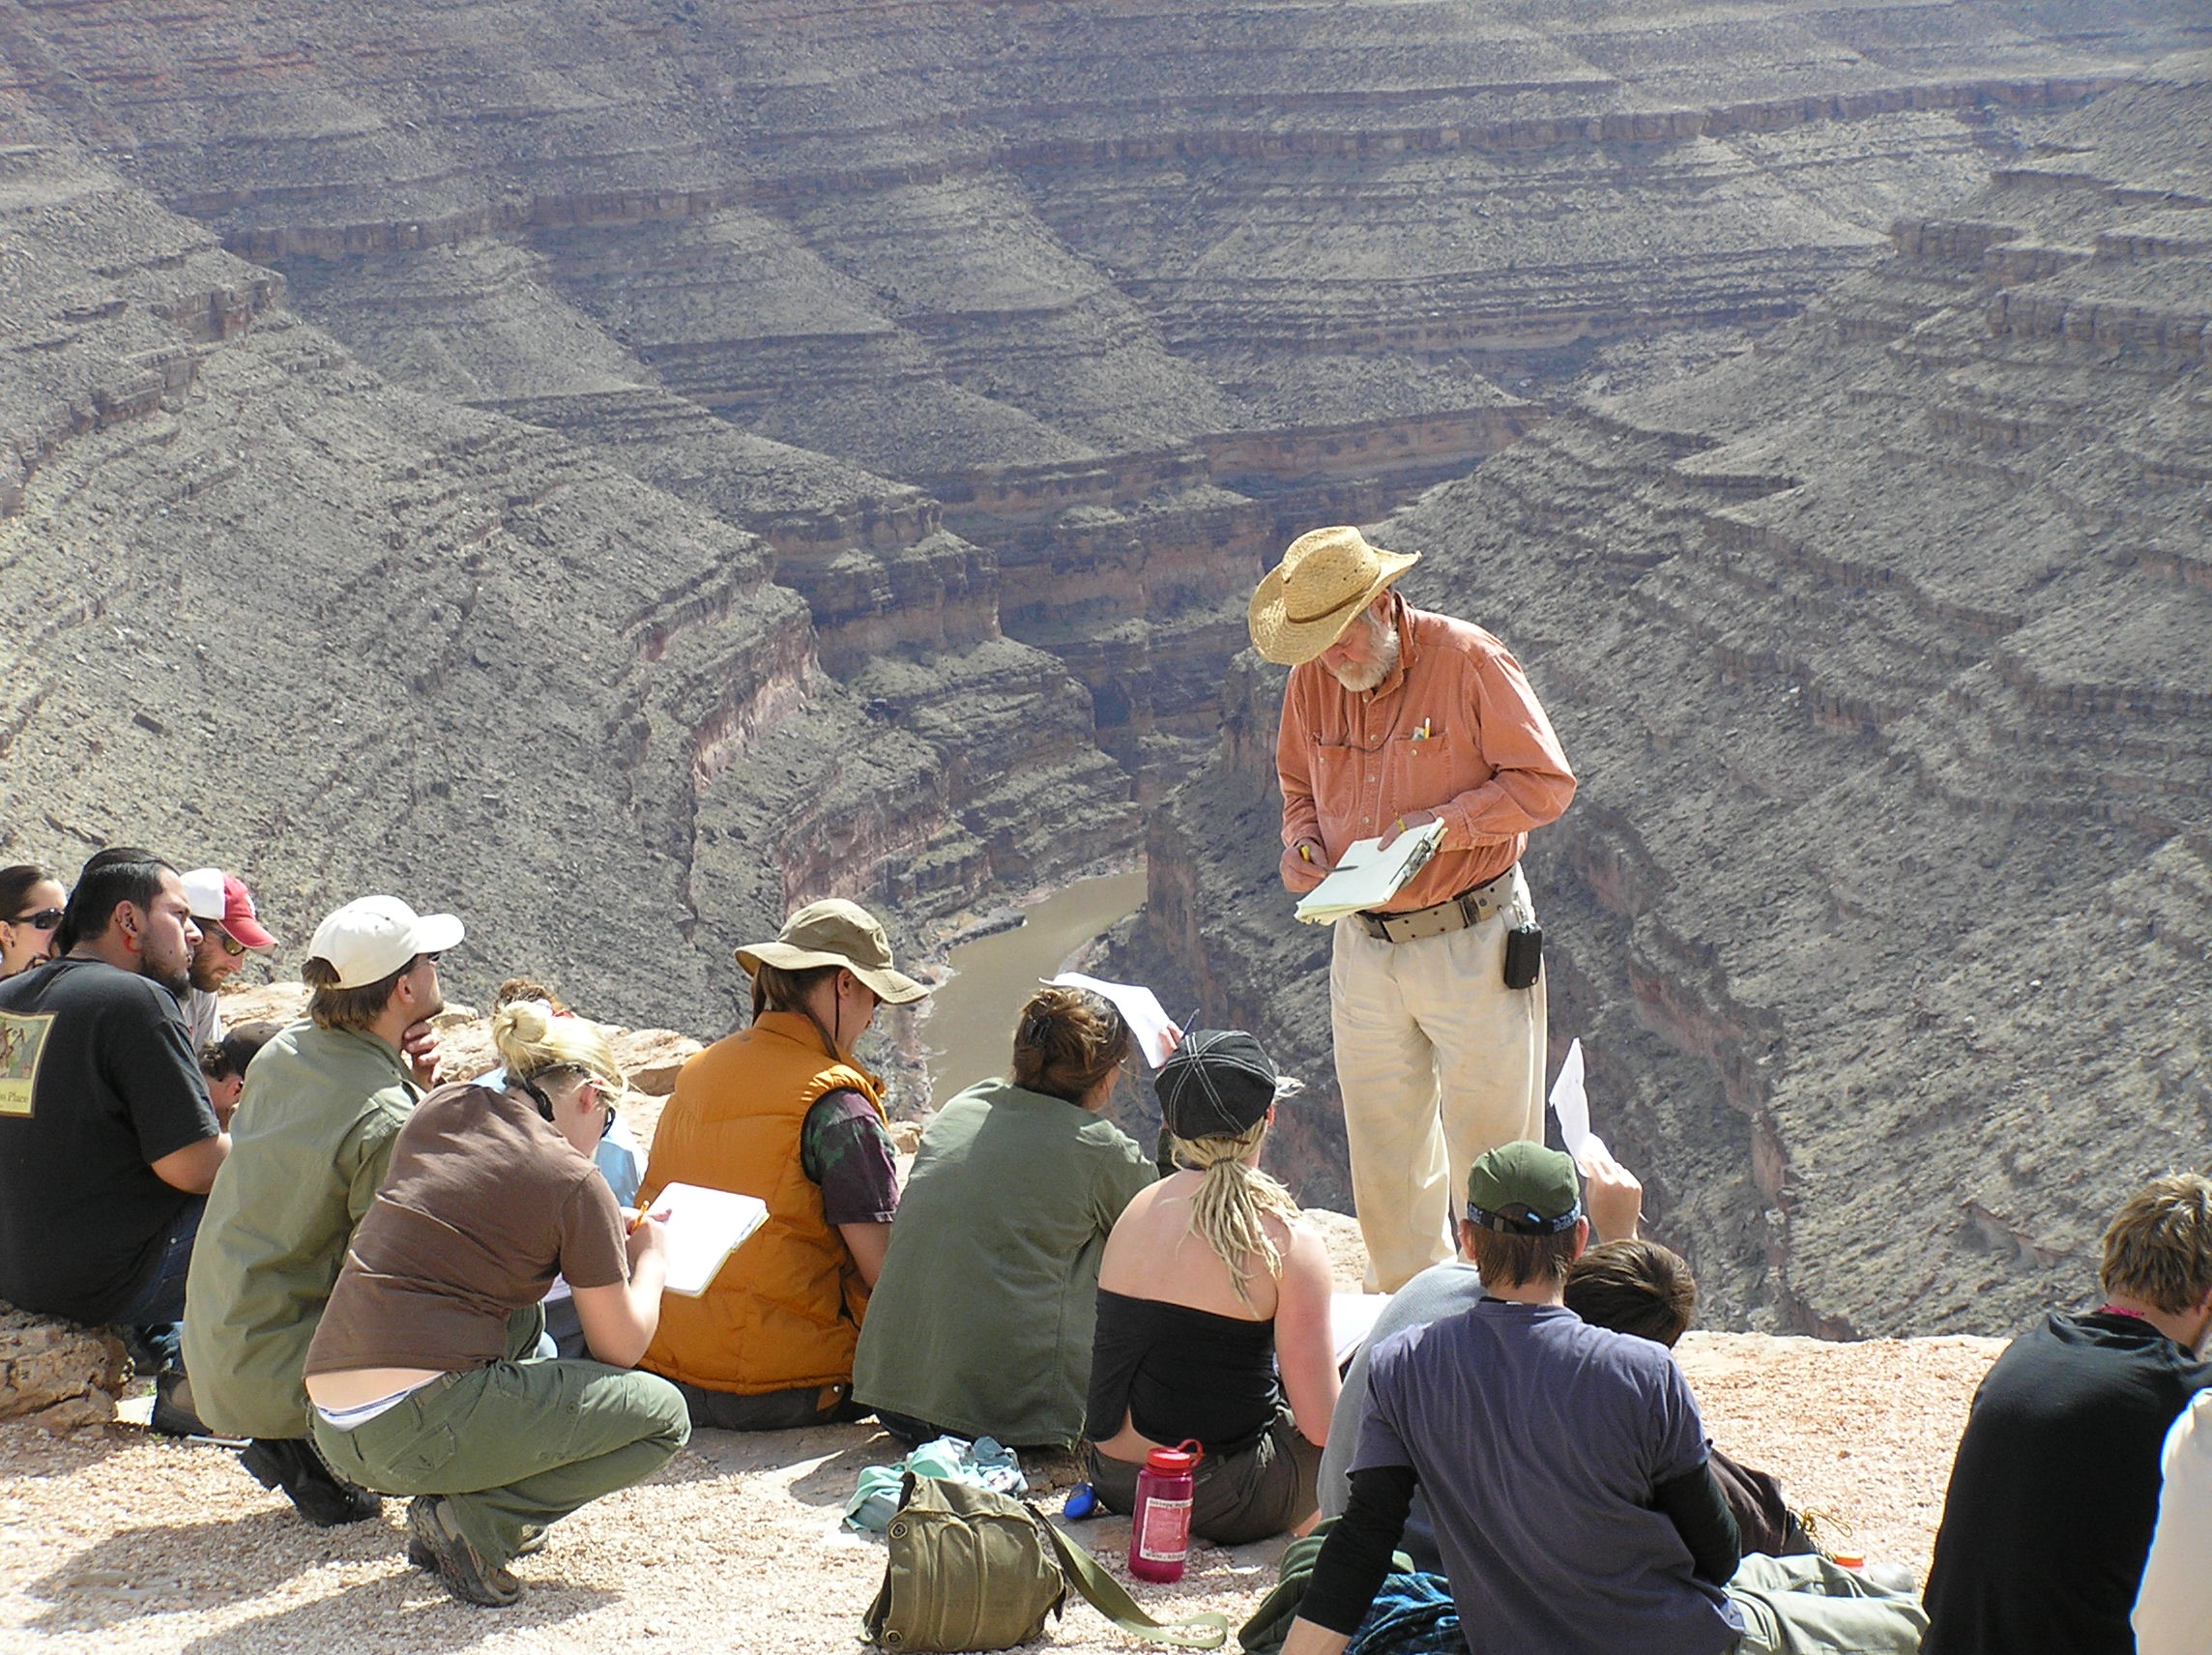 Don Winston teaches class on the edge of a giant canyon.